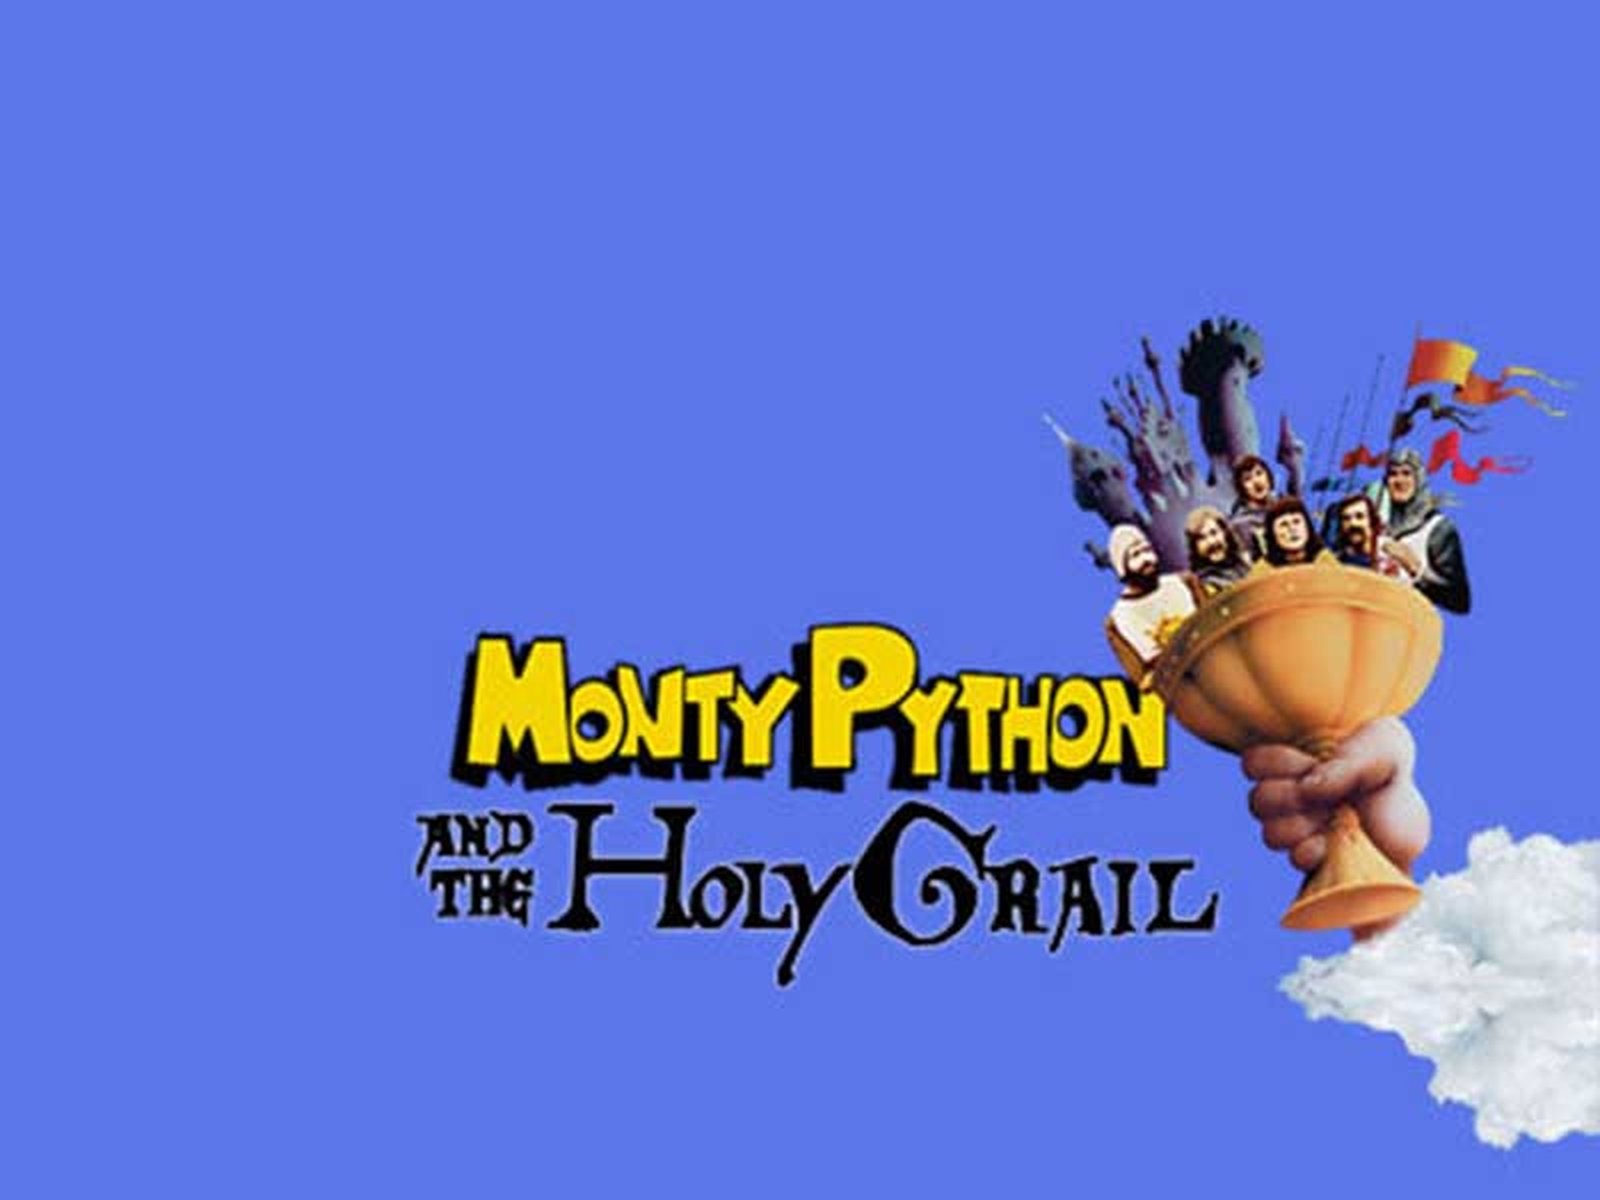 Monty Python and the Holy Grail demo